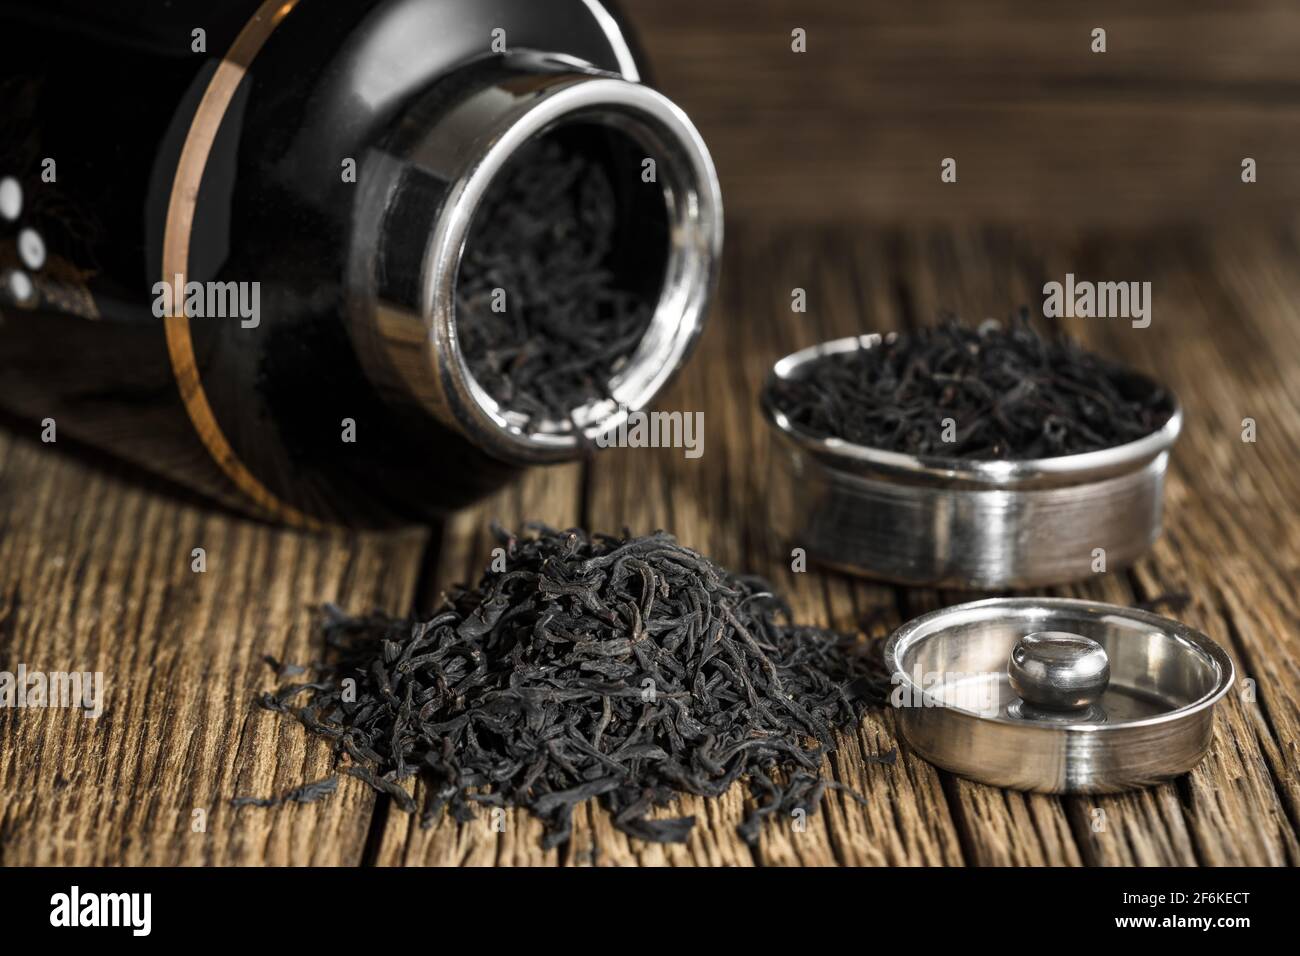 Black tea big leaf on the old wooden rustic table Stock Photo